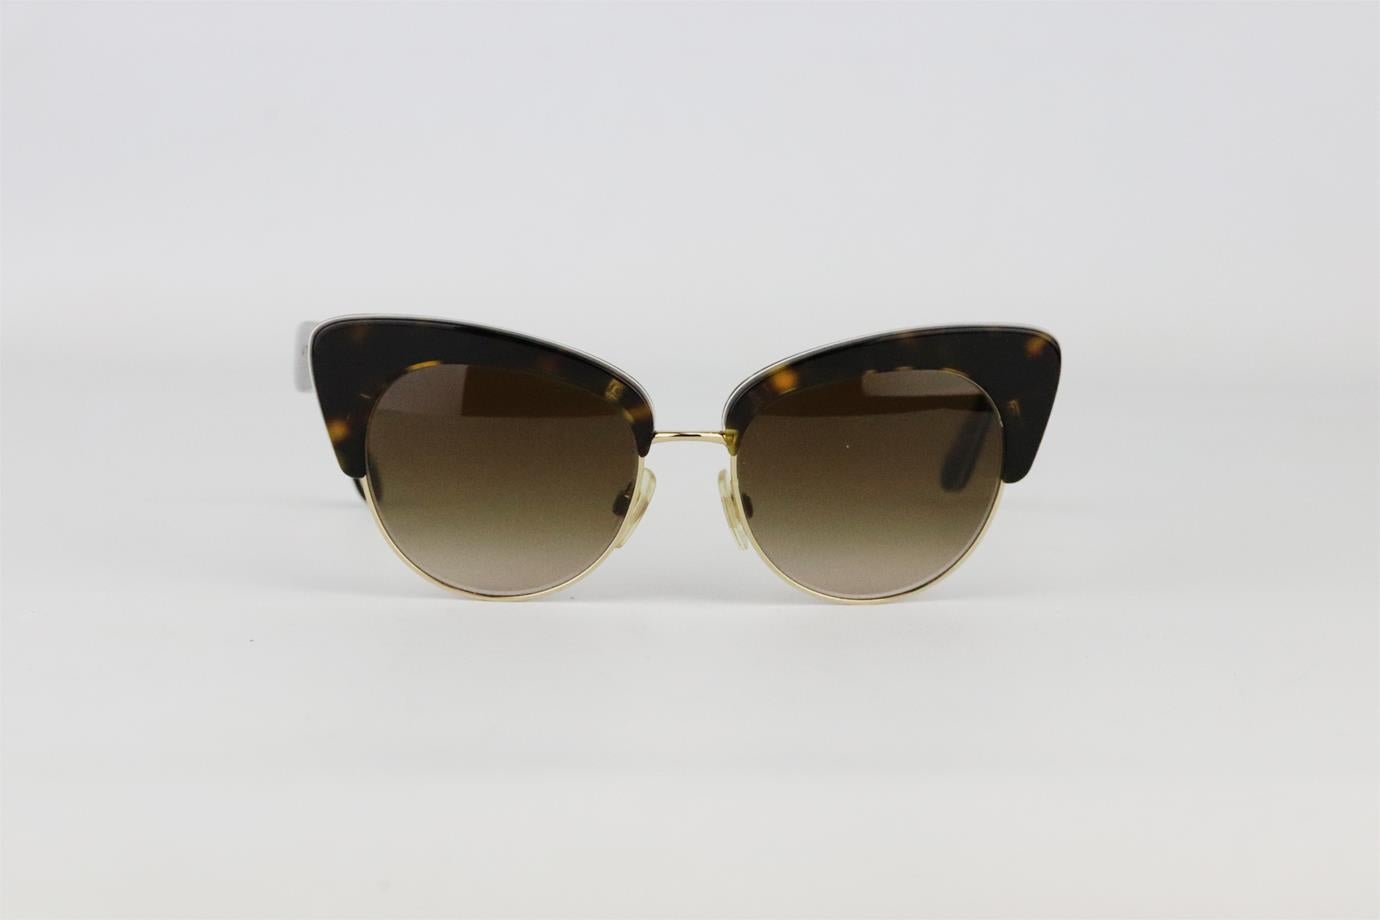 Dolce & Gabbana cat eye tortoiseshell acetate sunglasses. Made in brown tortoiseshell in a butterfly shape that gives them a vintage feel. Brown. Comes with box and case. Lens: 52 mm. Arm: 140 mm. Bridge: 17 mm